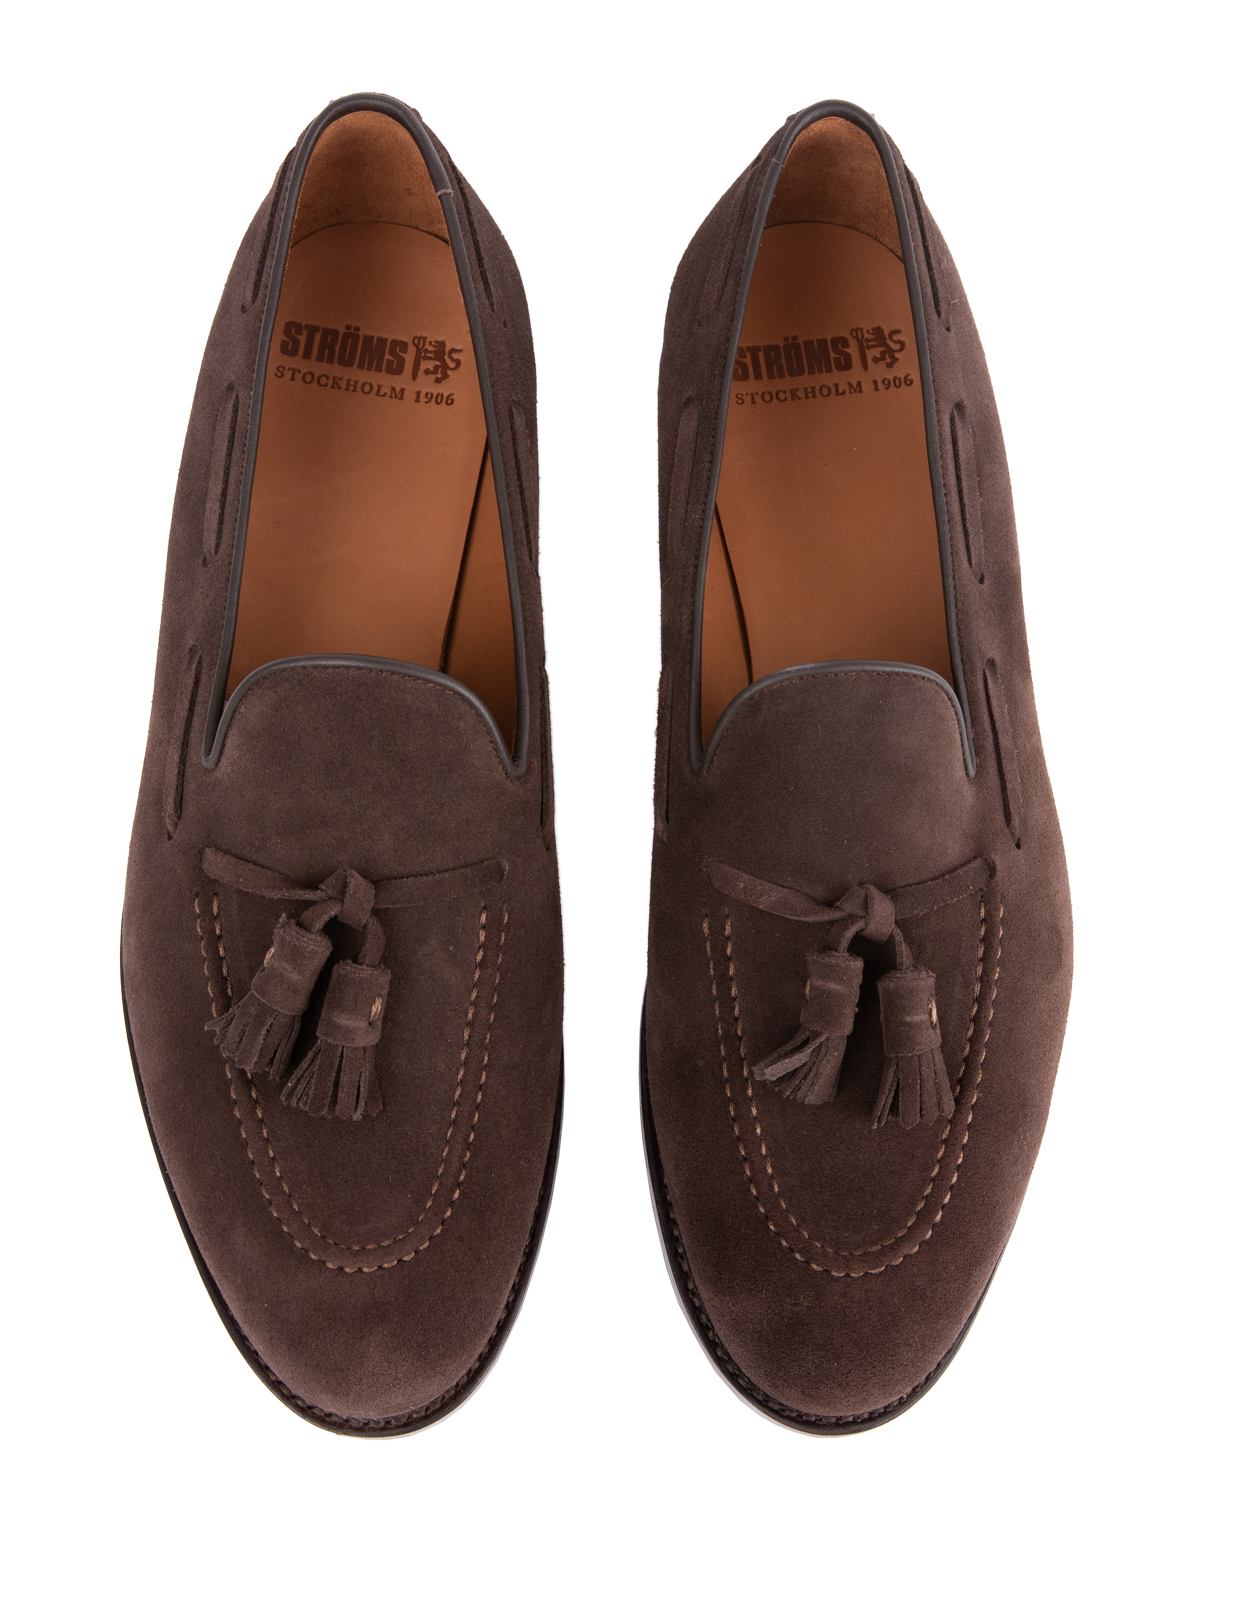 Tassel Loafers Suede Bitter Chocolate Stl 6.5